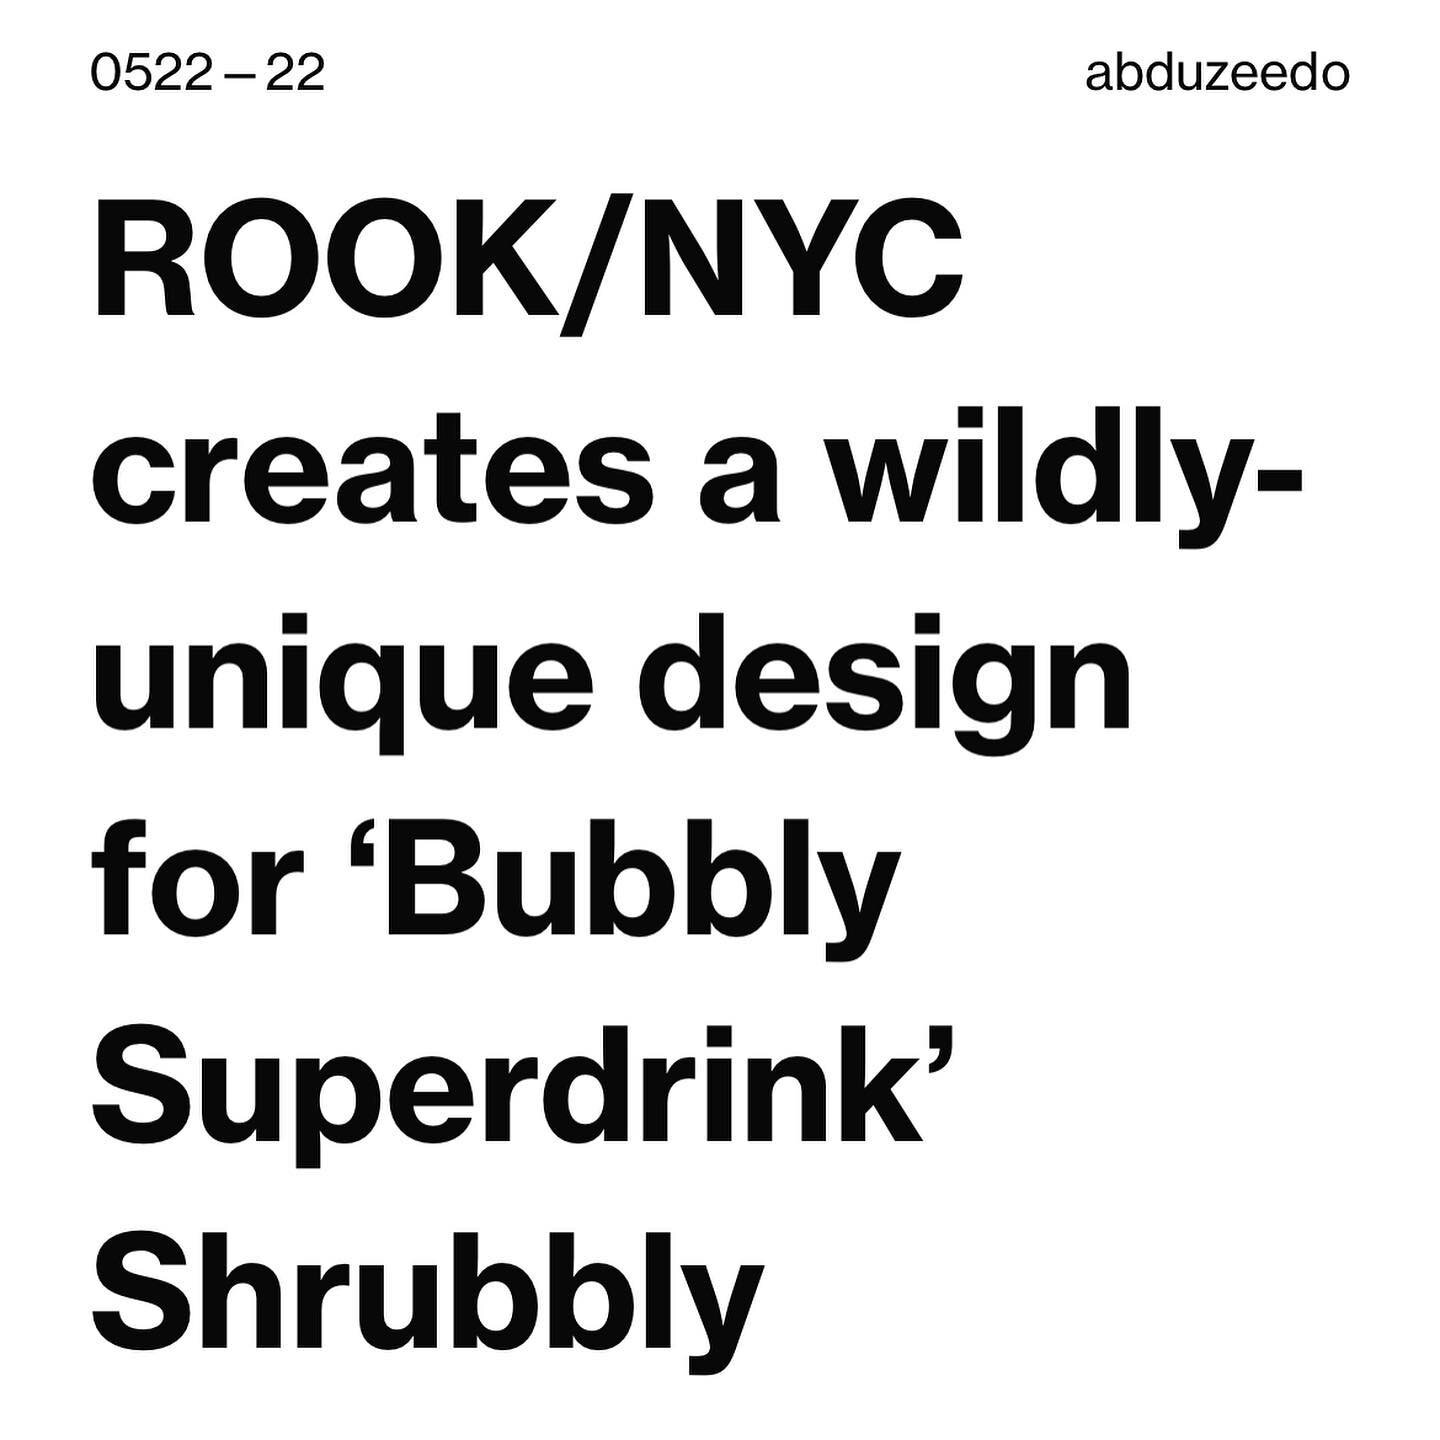 ROOK/NYC creates a wildly unique design for &lsquo;Bubbly Superdrink&rsquo; Shrubbly 🫧 

Full article on @abduzeedo